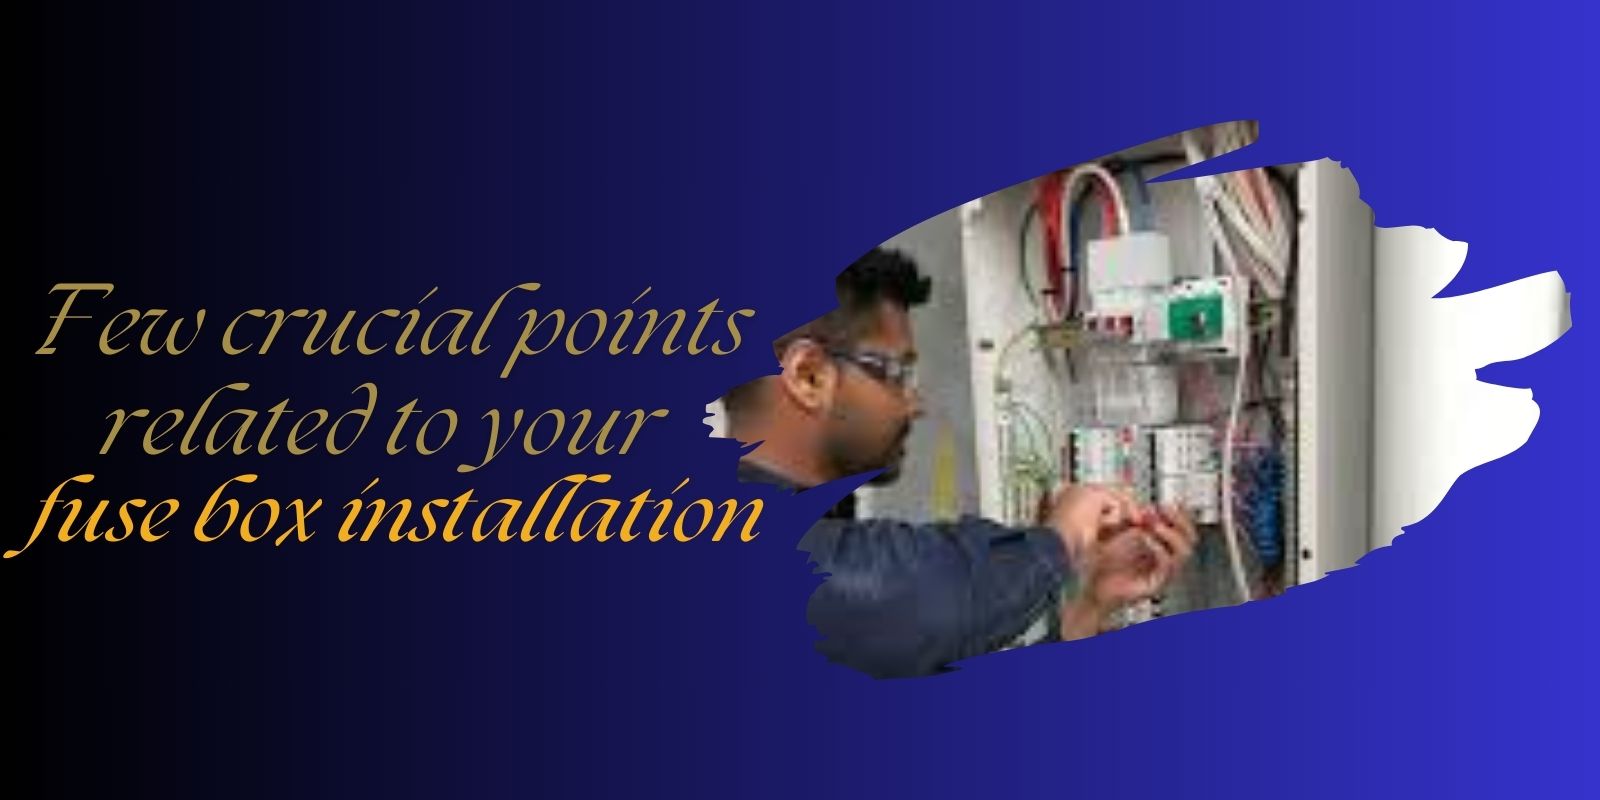 Few crucial points related to your fuse box installation